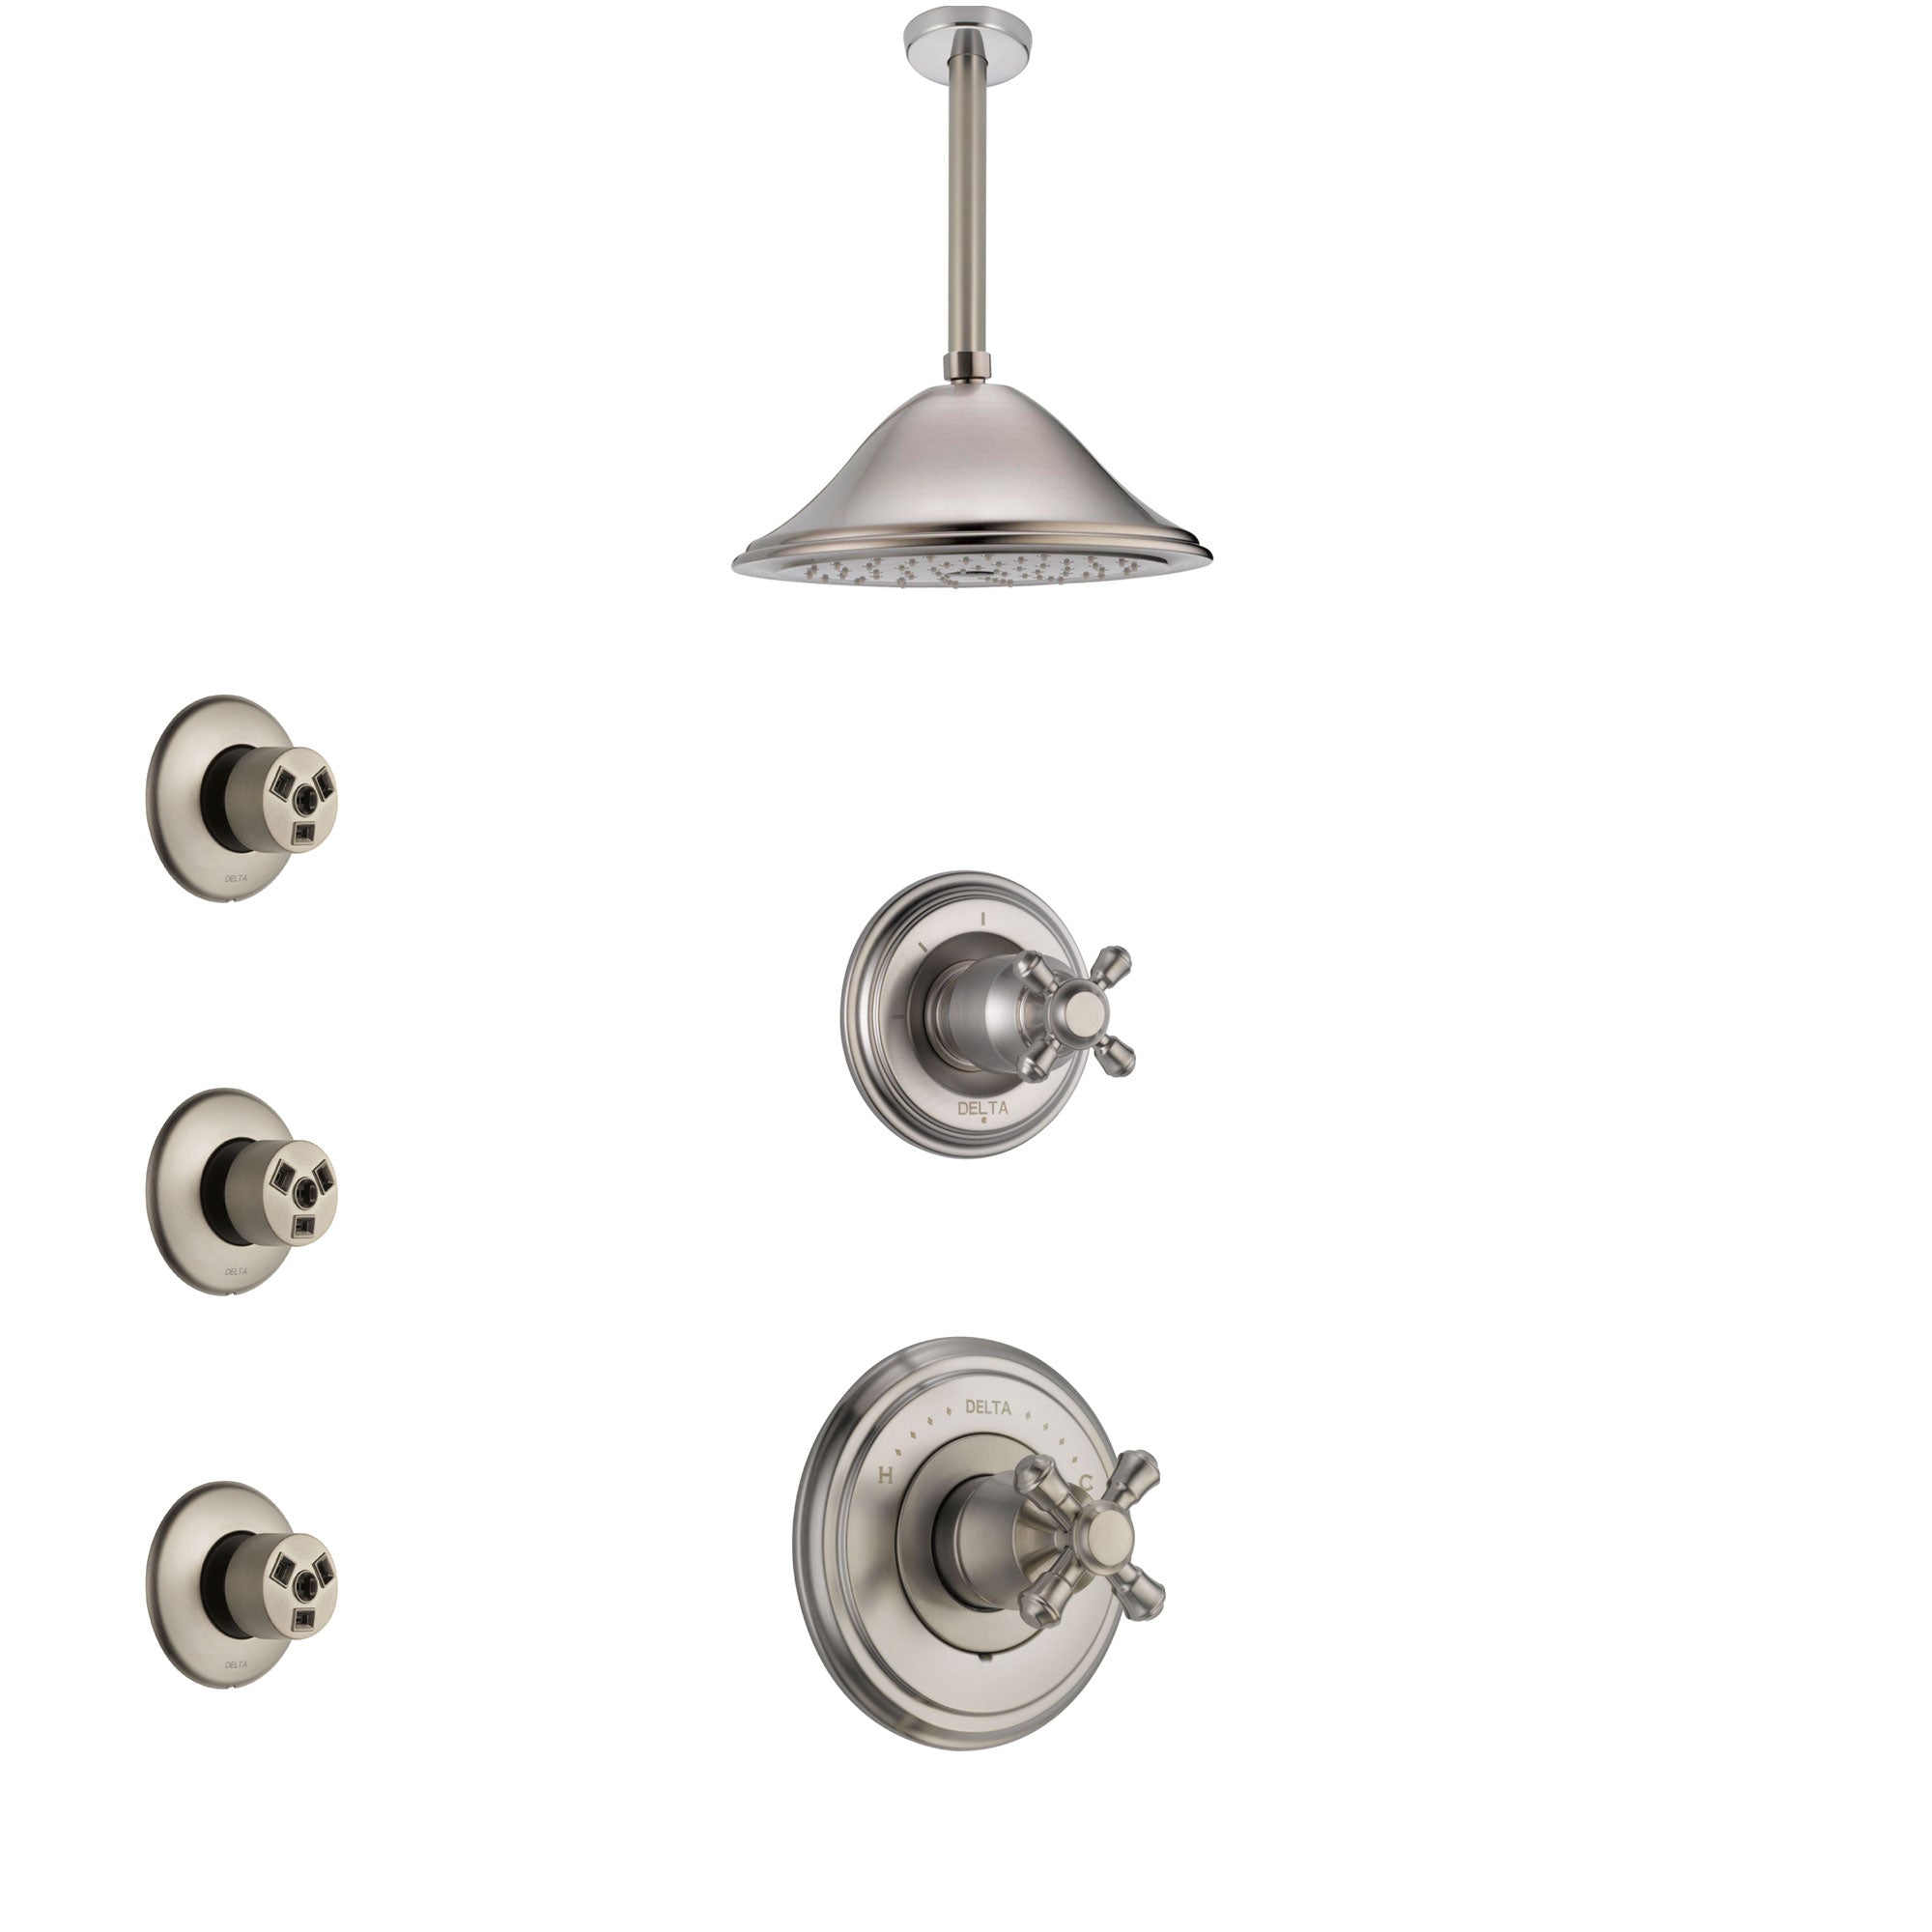 Delta Cassidy Stainless Steel Finish Shower System with Control Handle, 3-Setting Diverter, Ceiling Mount Showerhead, and 3 Body Sprays SS14972SS6